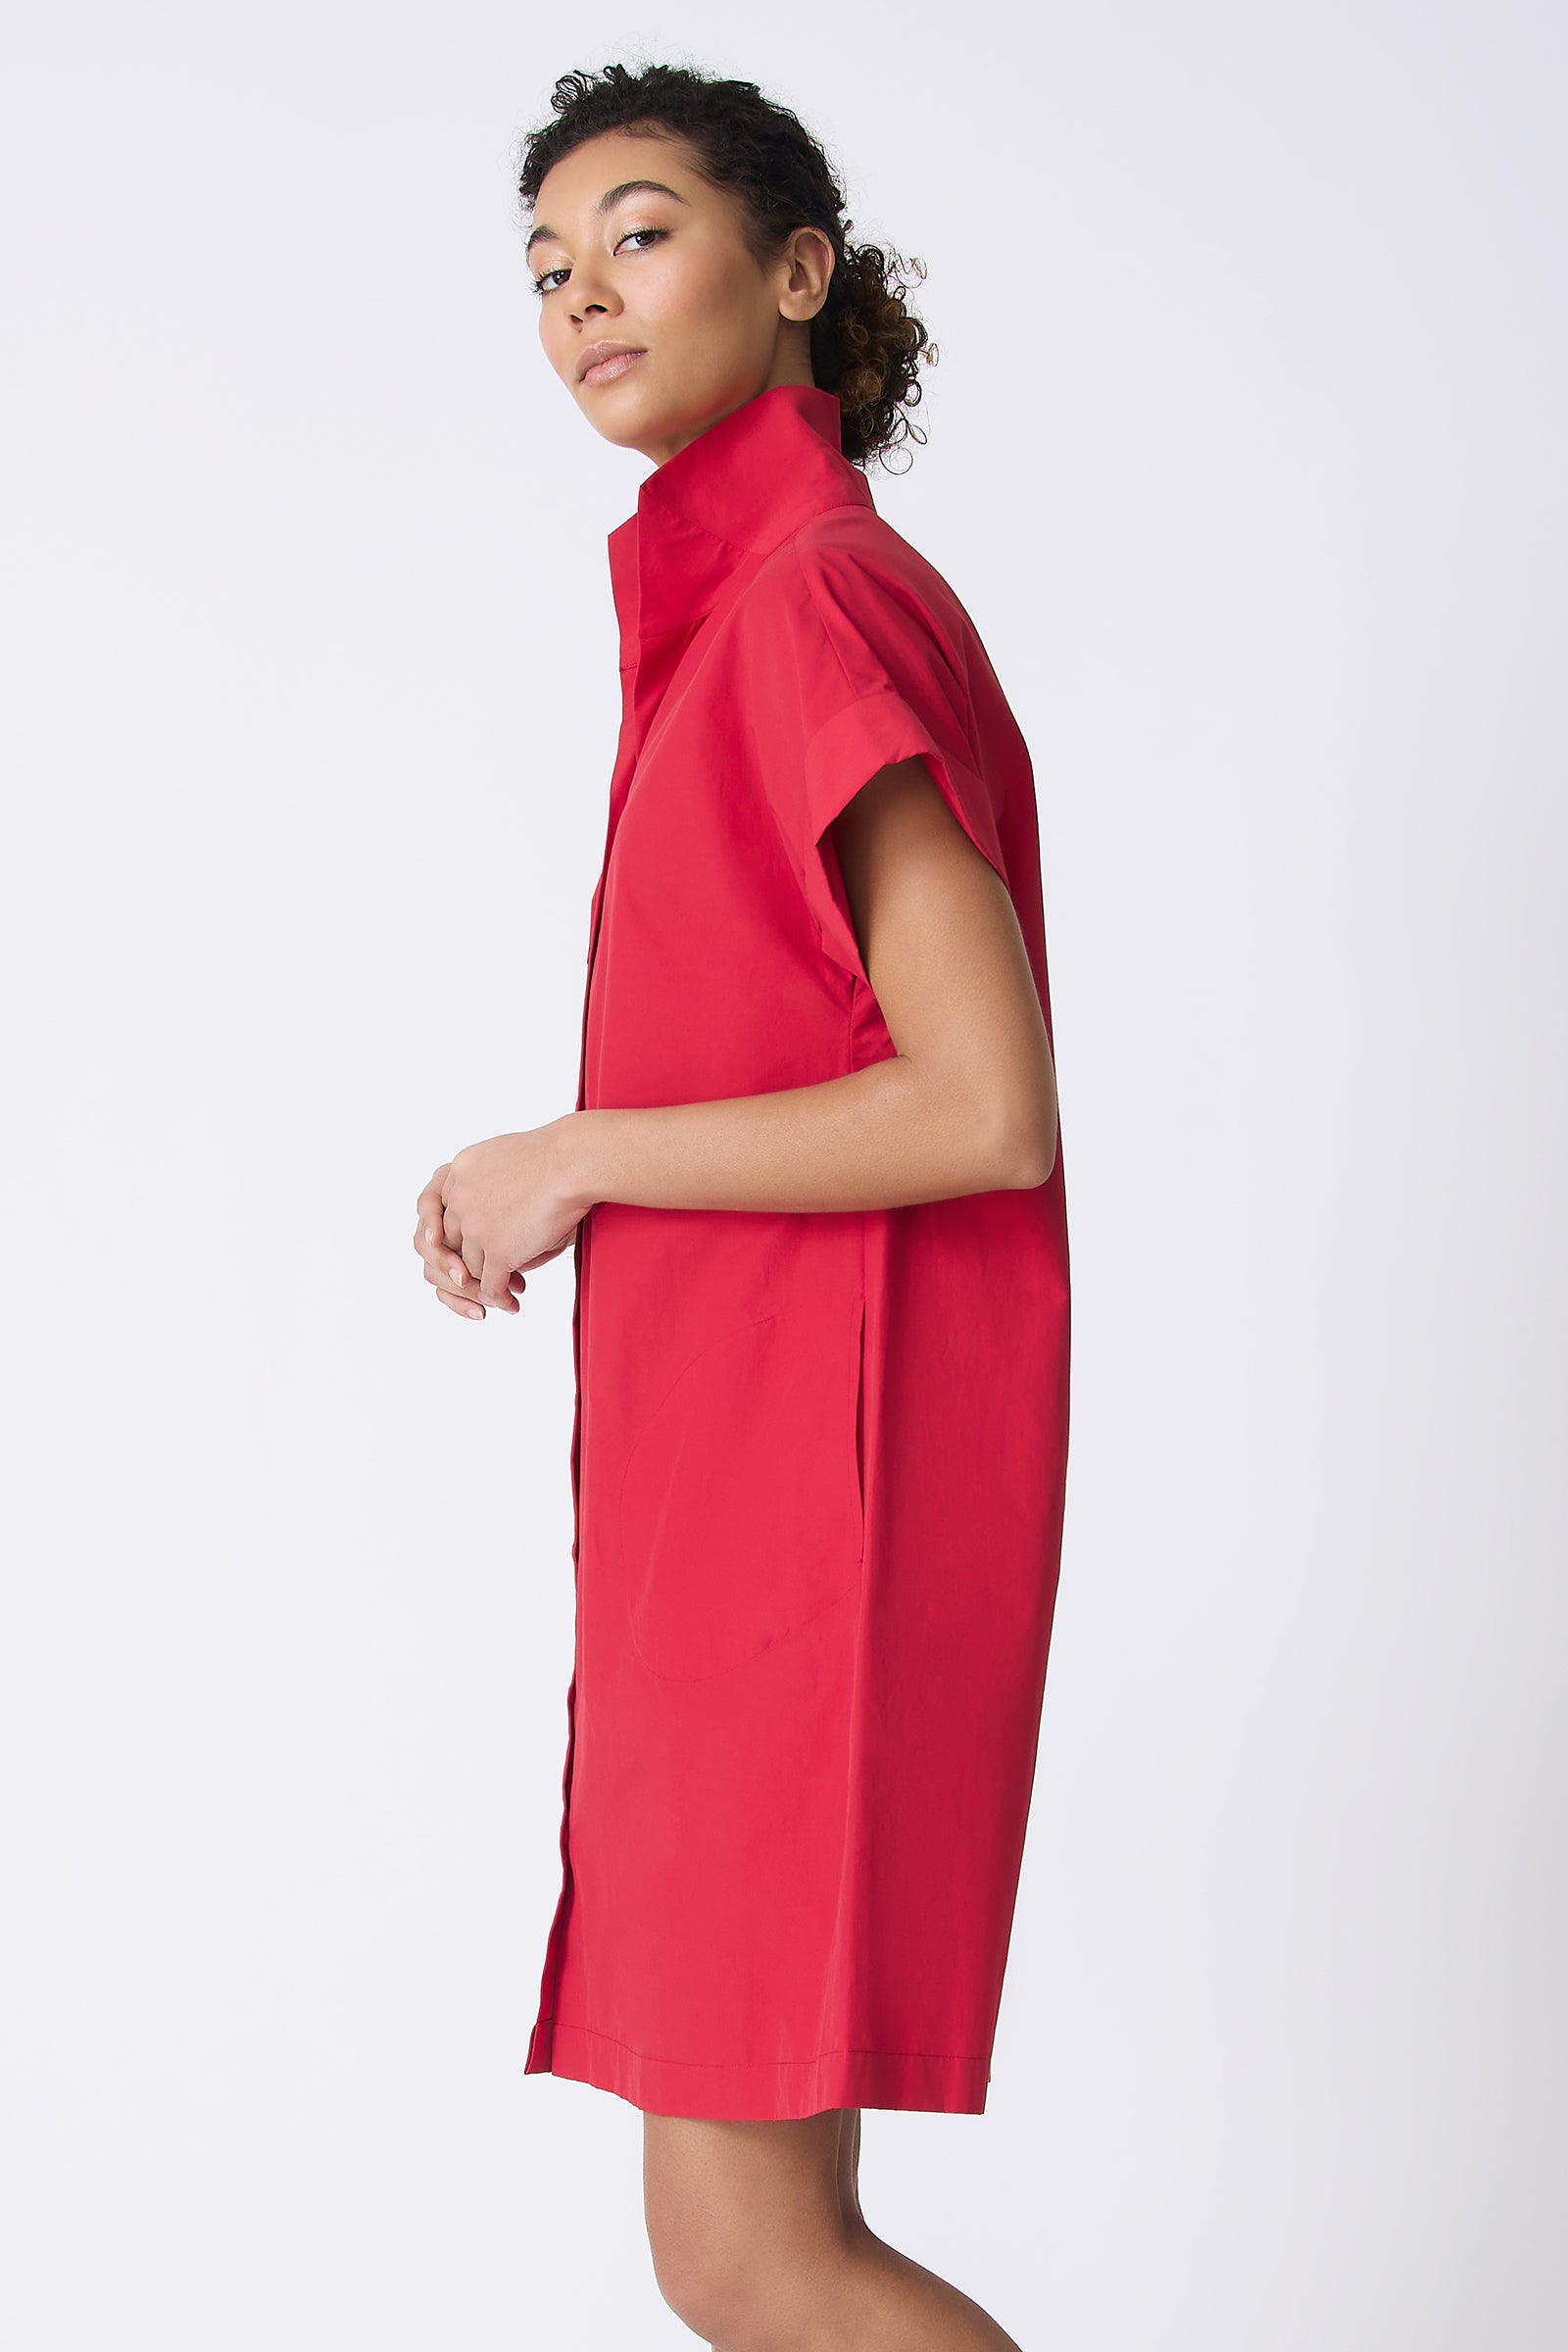 Kal Rieman Holly Kimono Dress in Red on model side view